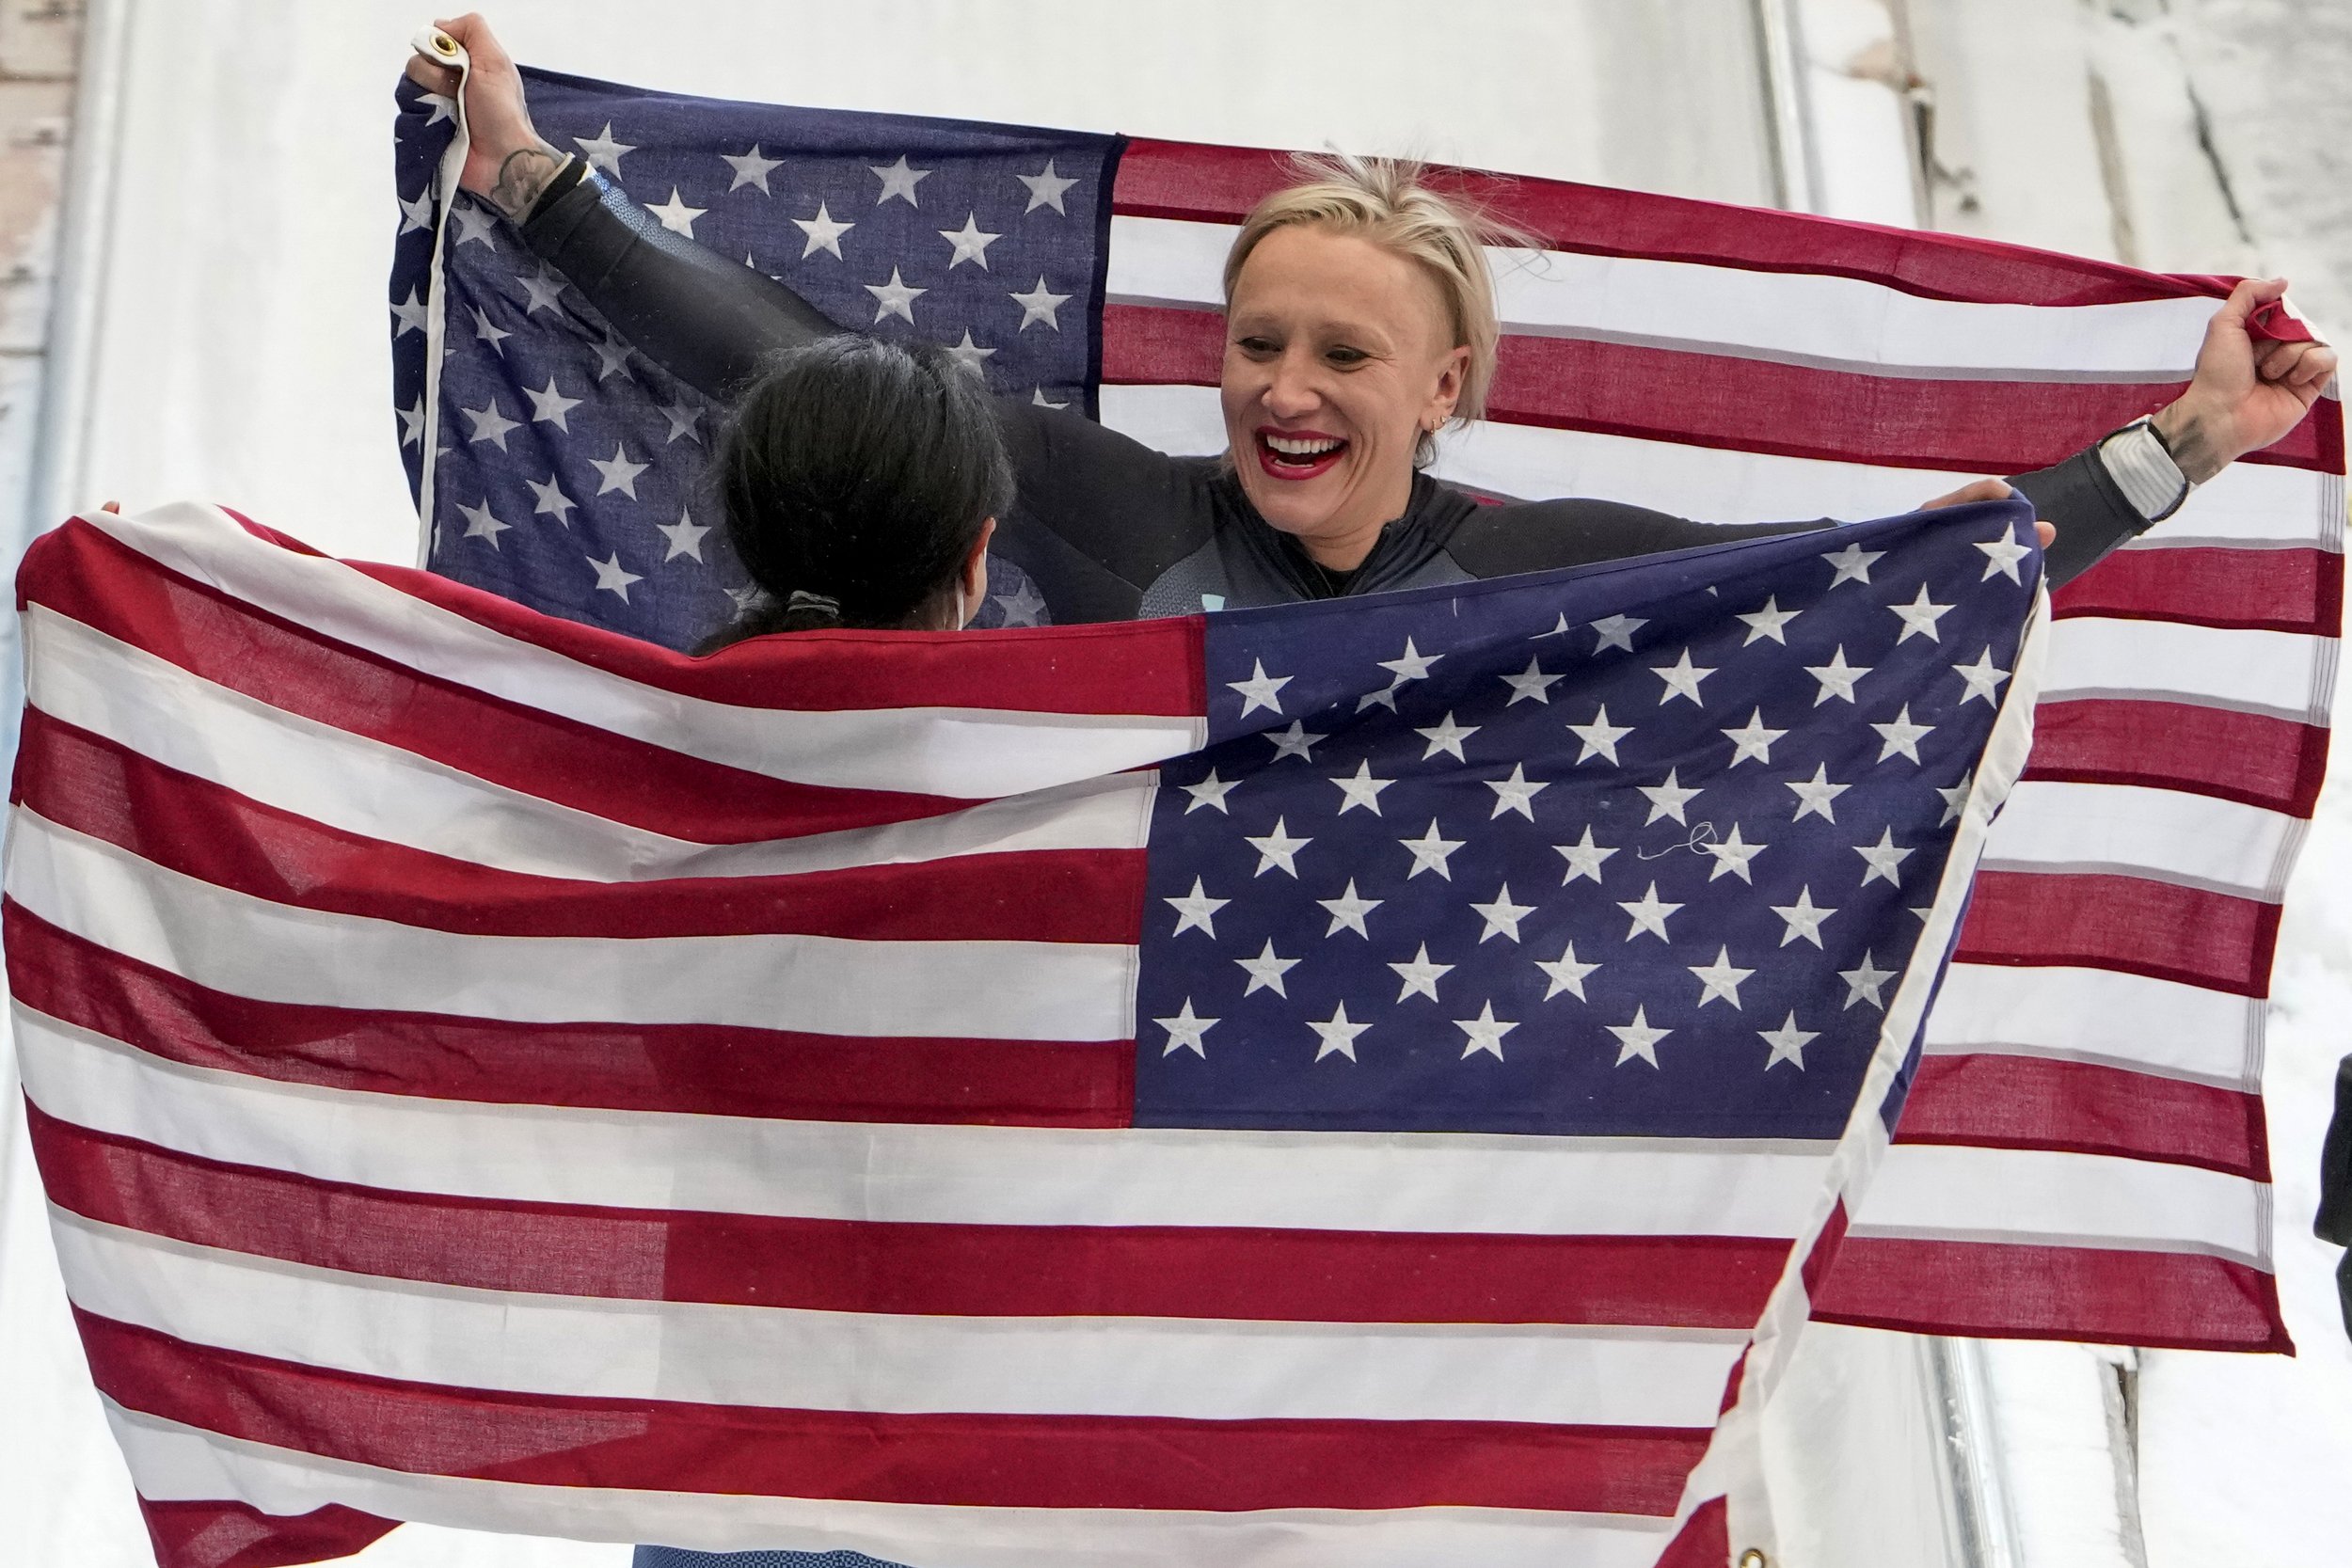  Kaillie Humphries, of the United States, center, and teammate Elana Meyers Taylor celebrate winning the gold and silver medals in the women's monobob at the 2022 Winter Olympics, Monday, Feb. 14, 2022, in the Yanqing district of Beijing. (AP Photo/P